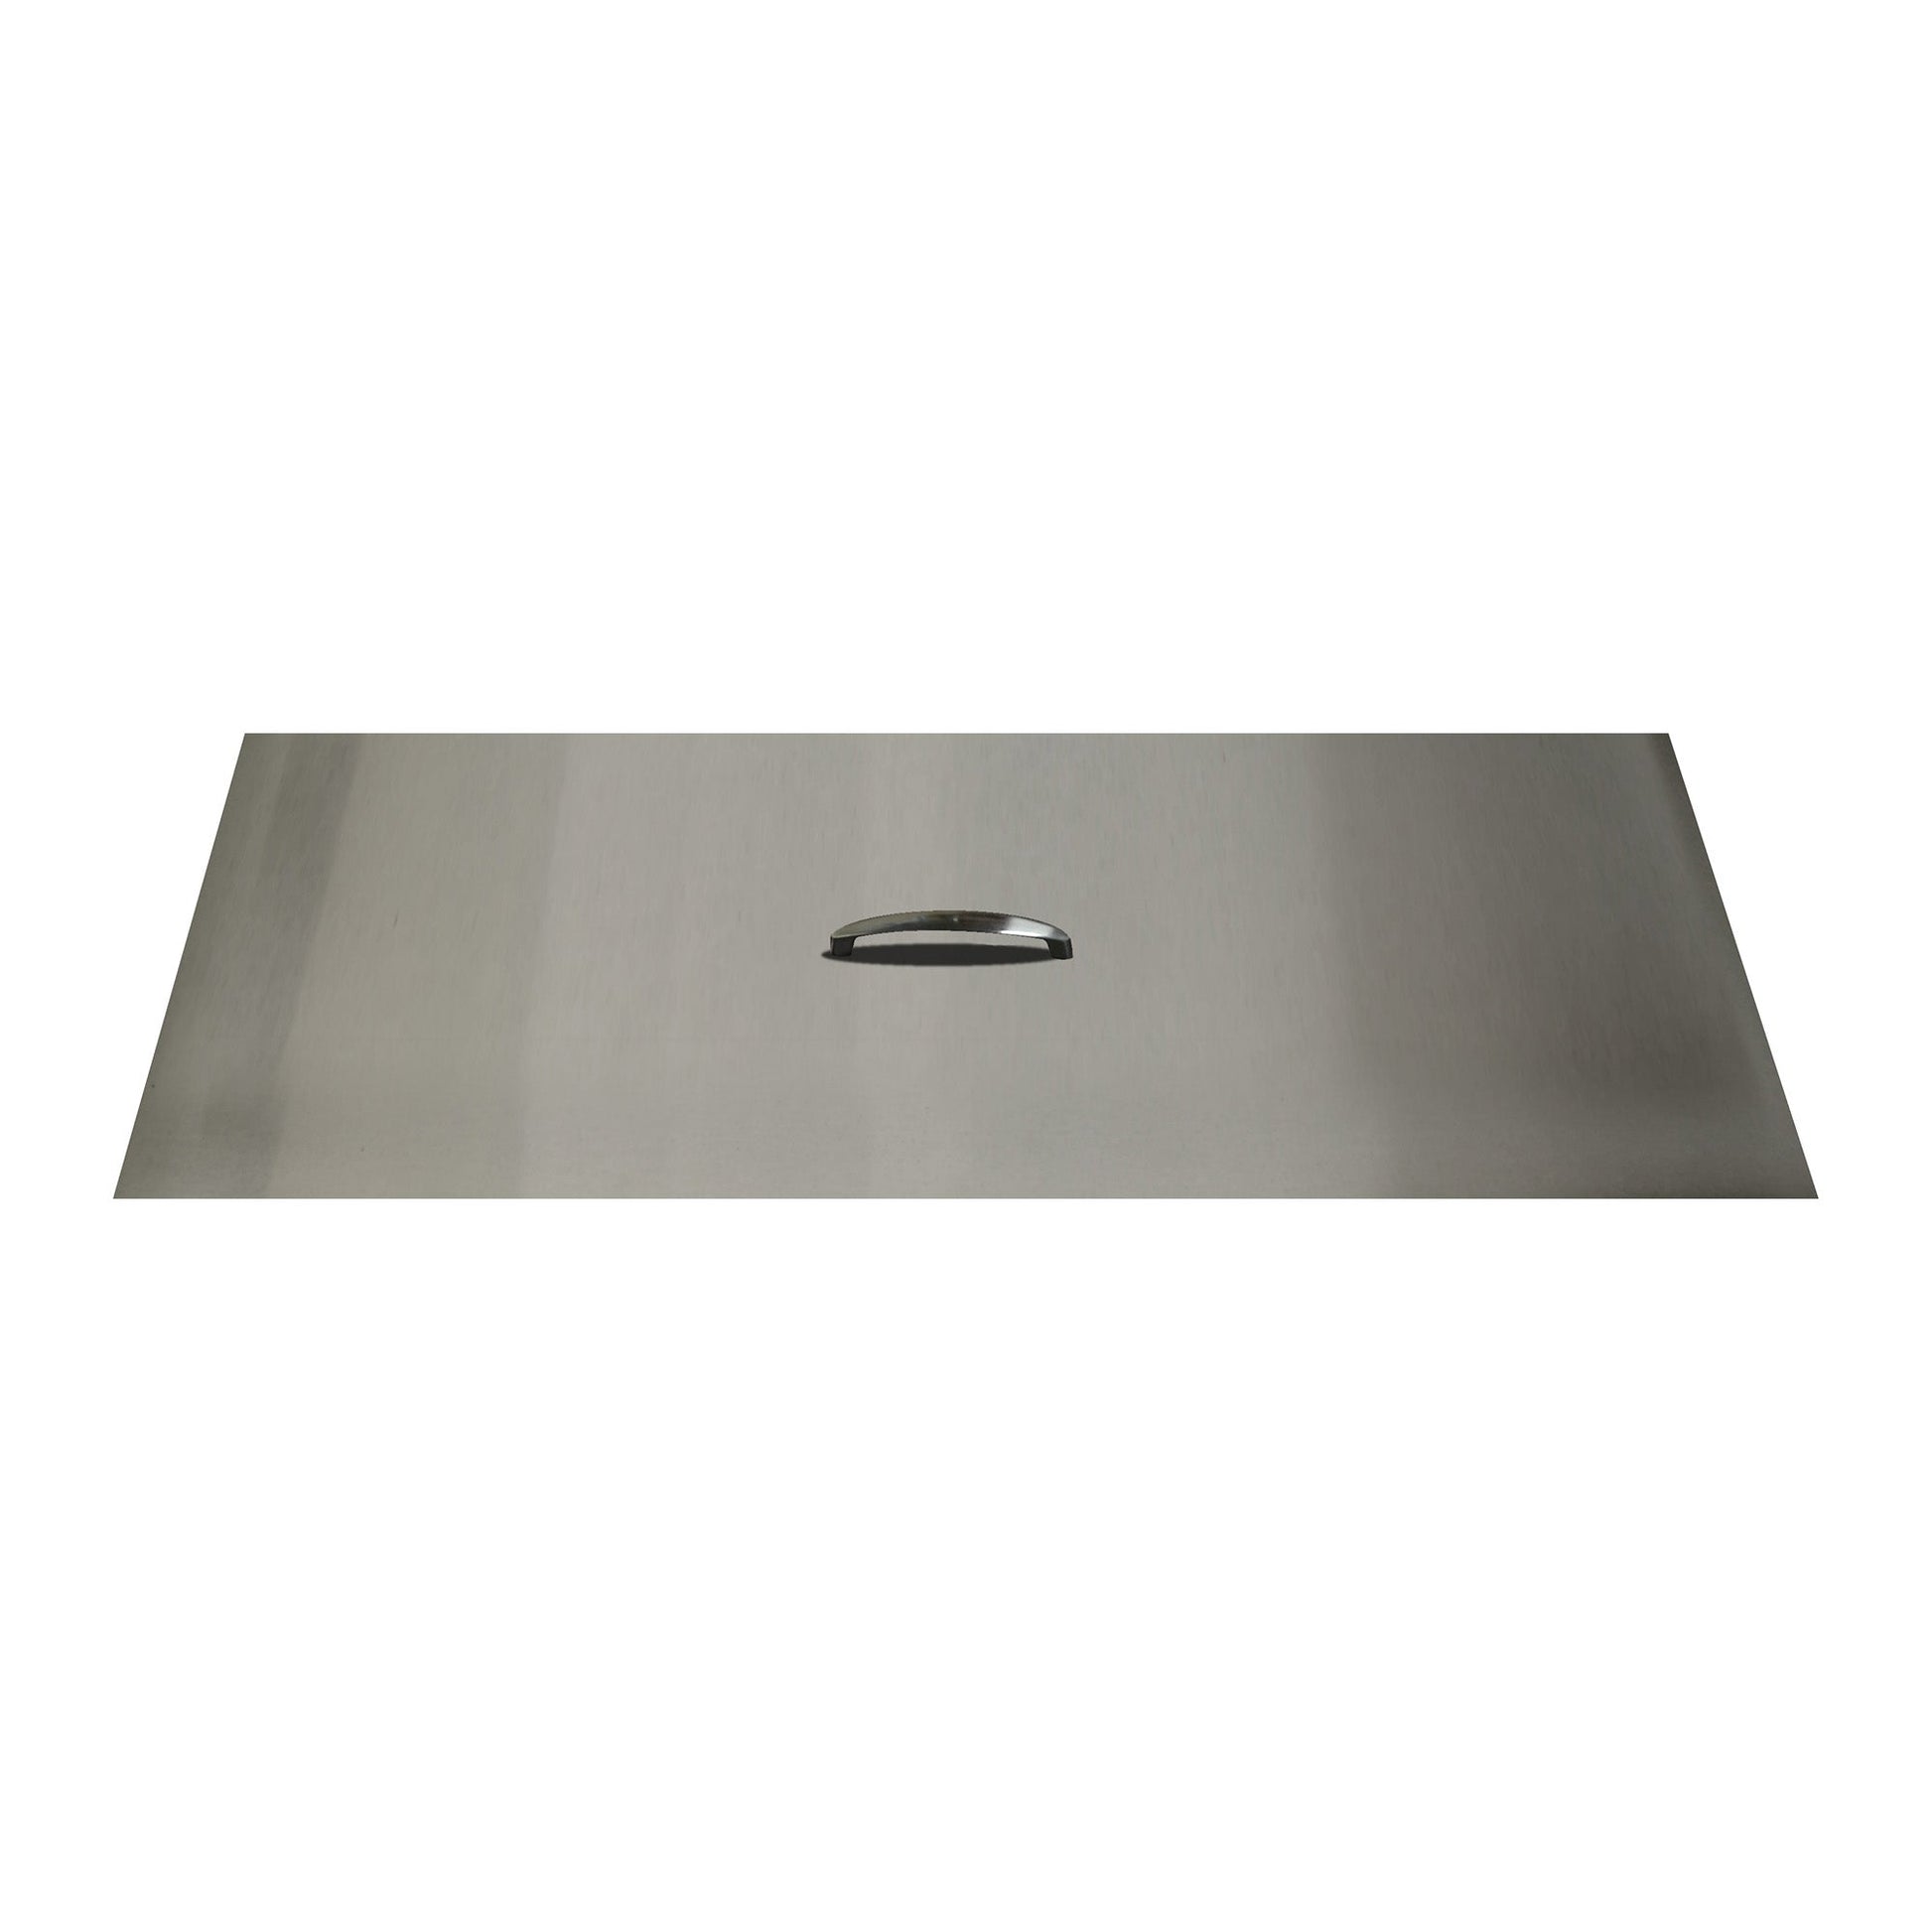 The Outdoor Plus 16" x 68" Stainless Steel Rectangular Fire Pit Lid Cover